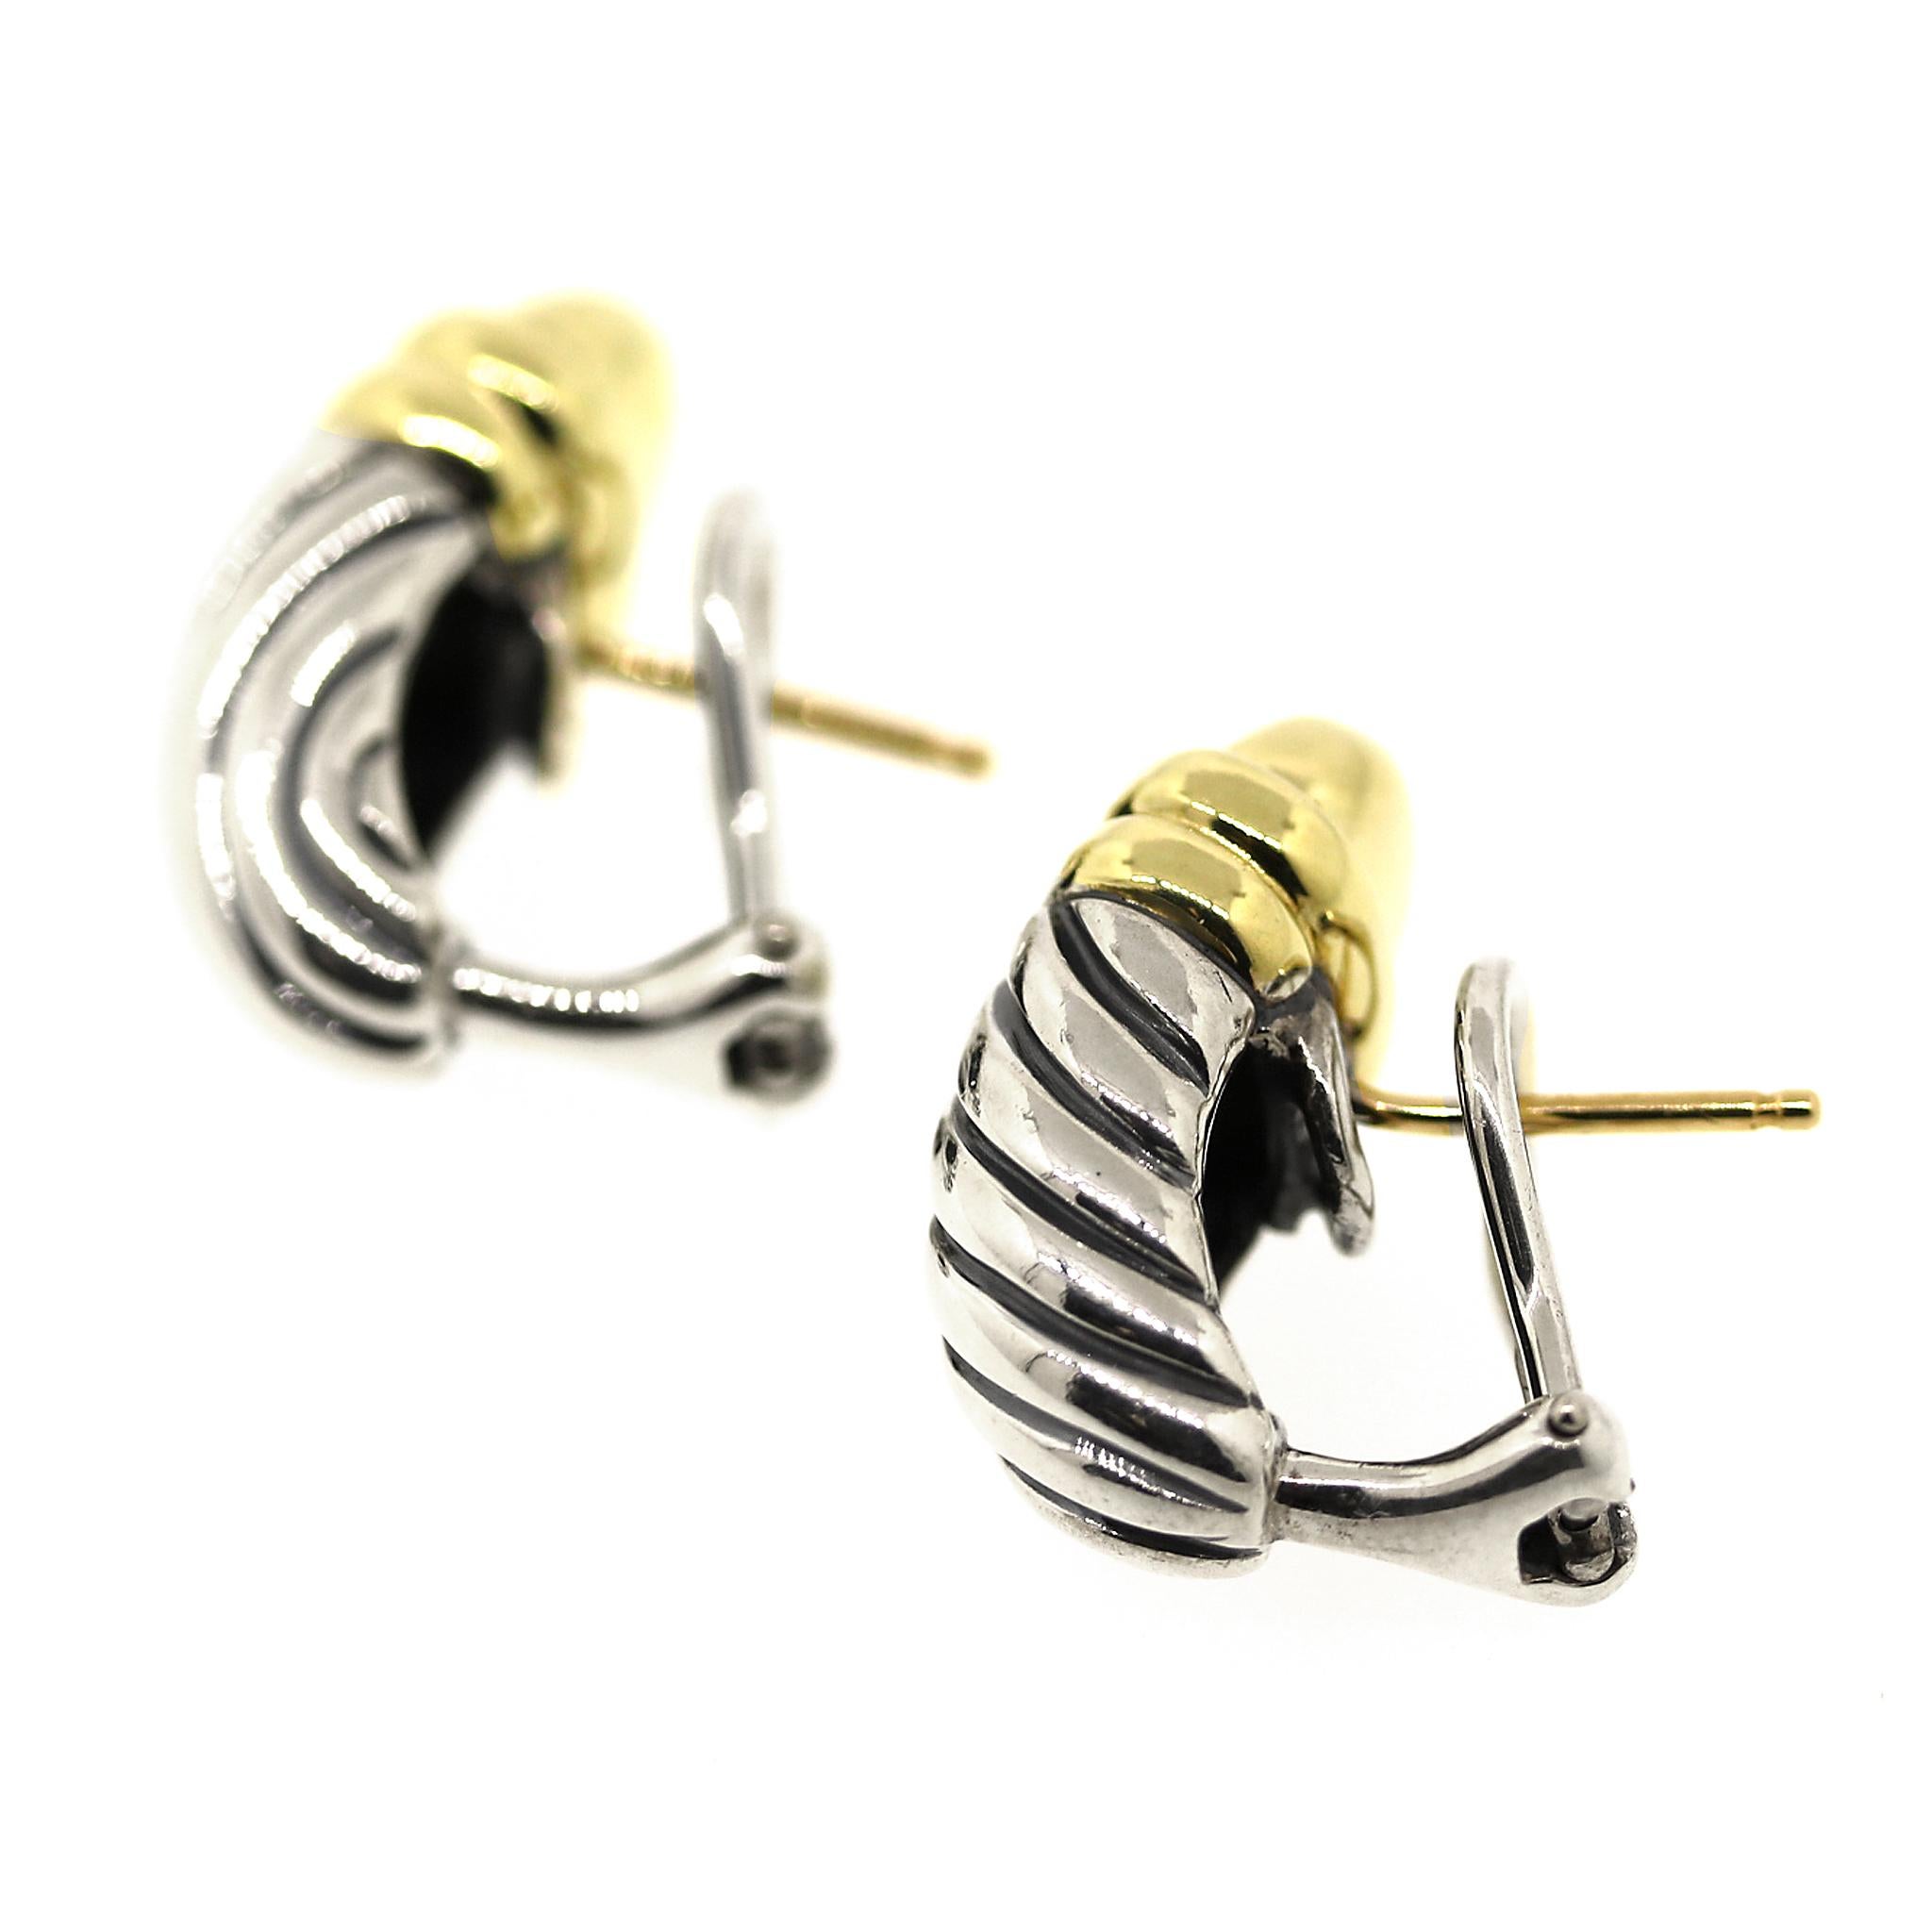 David Yurman Cable Shrimp Earrings in Sterling Silver and 14k Yellow Gold 2